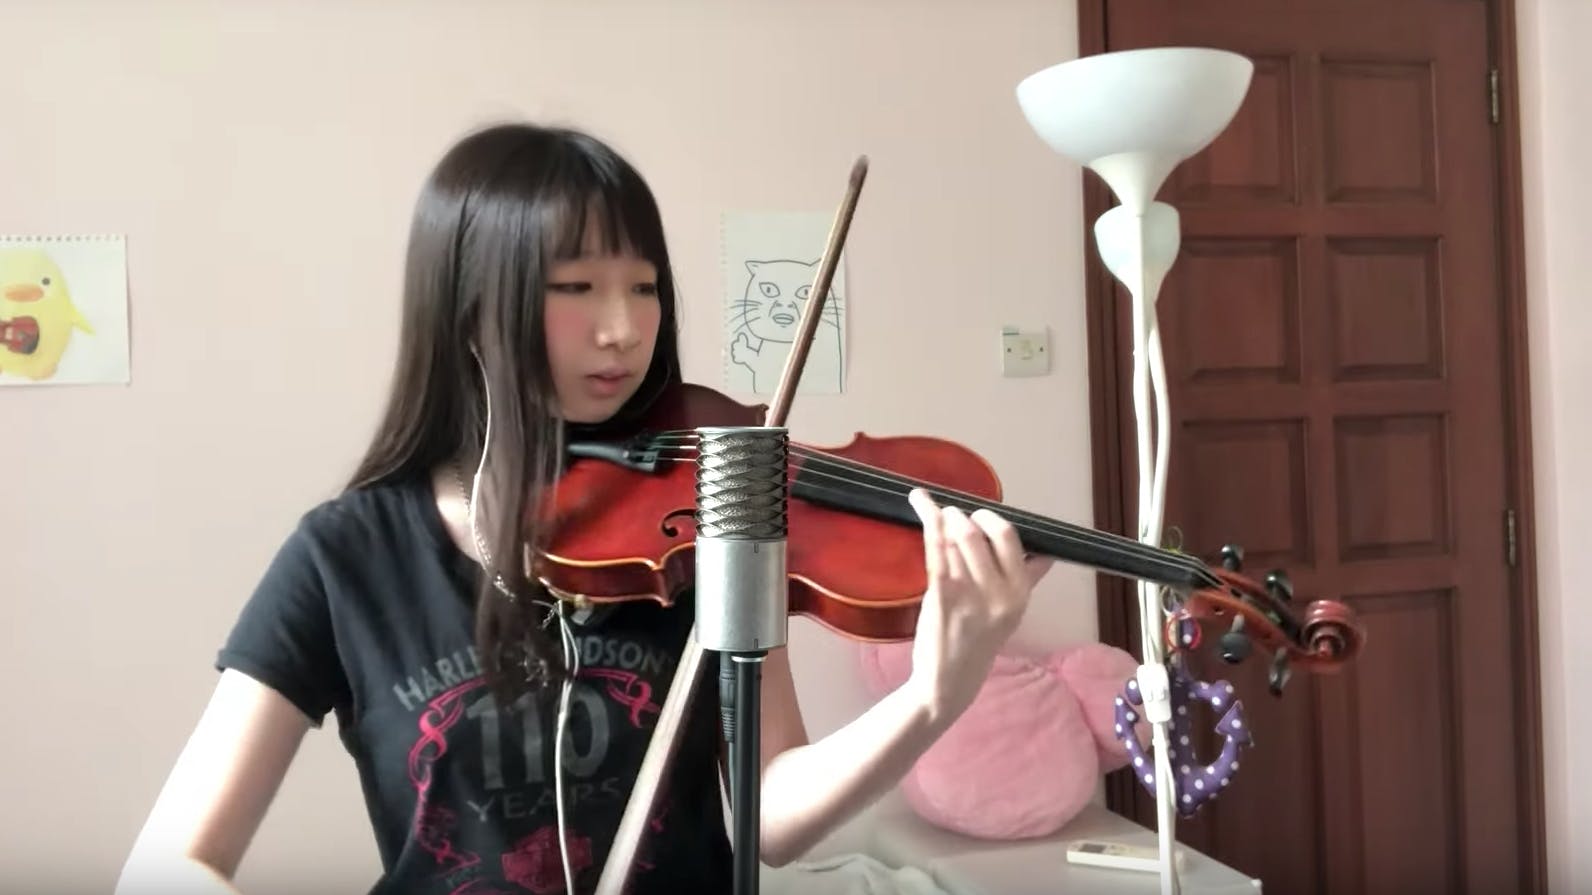 Watch This Incredible Violin Cover Of Slipknot's Unsainted